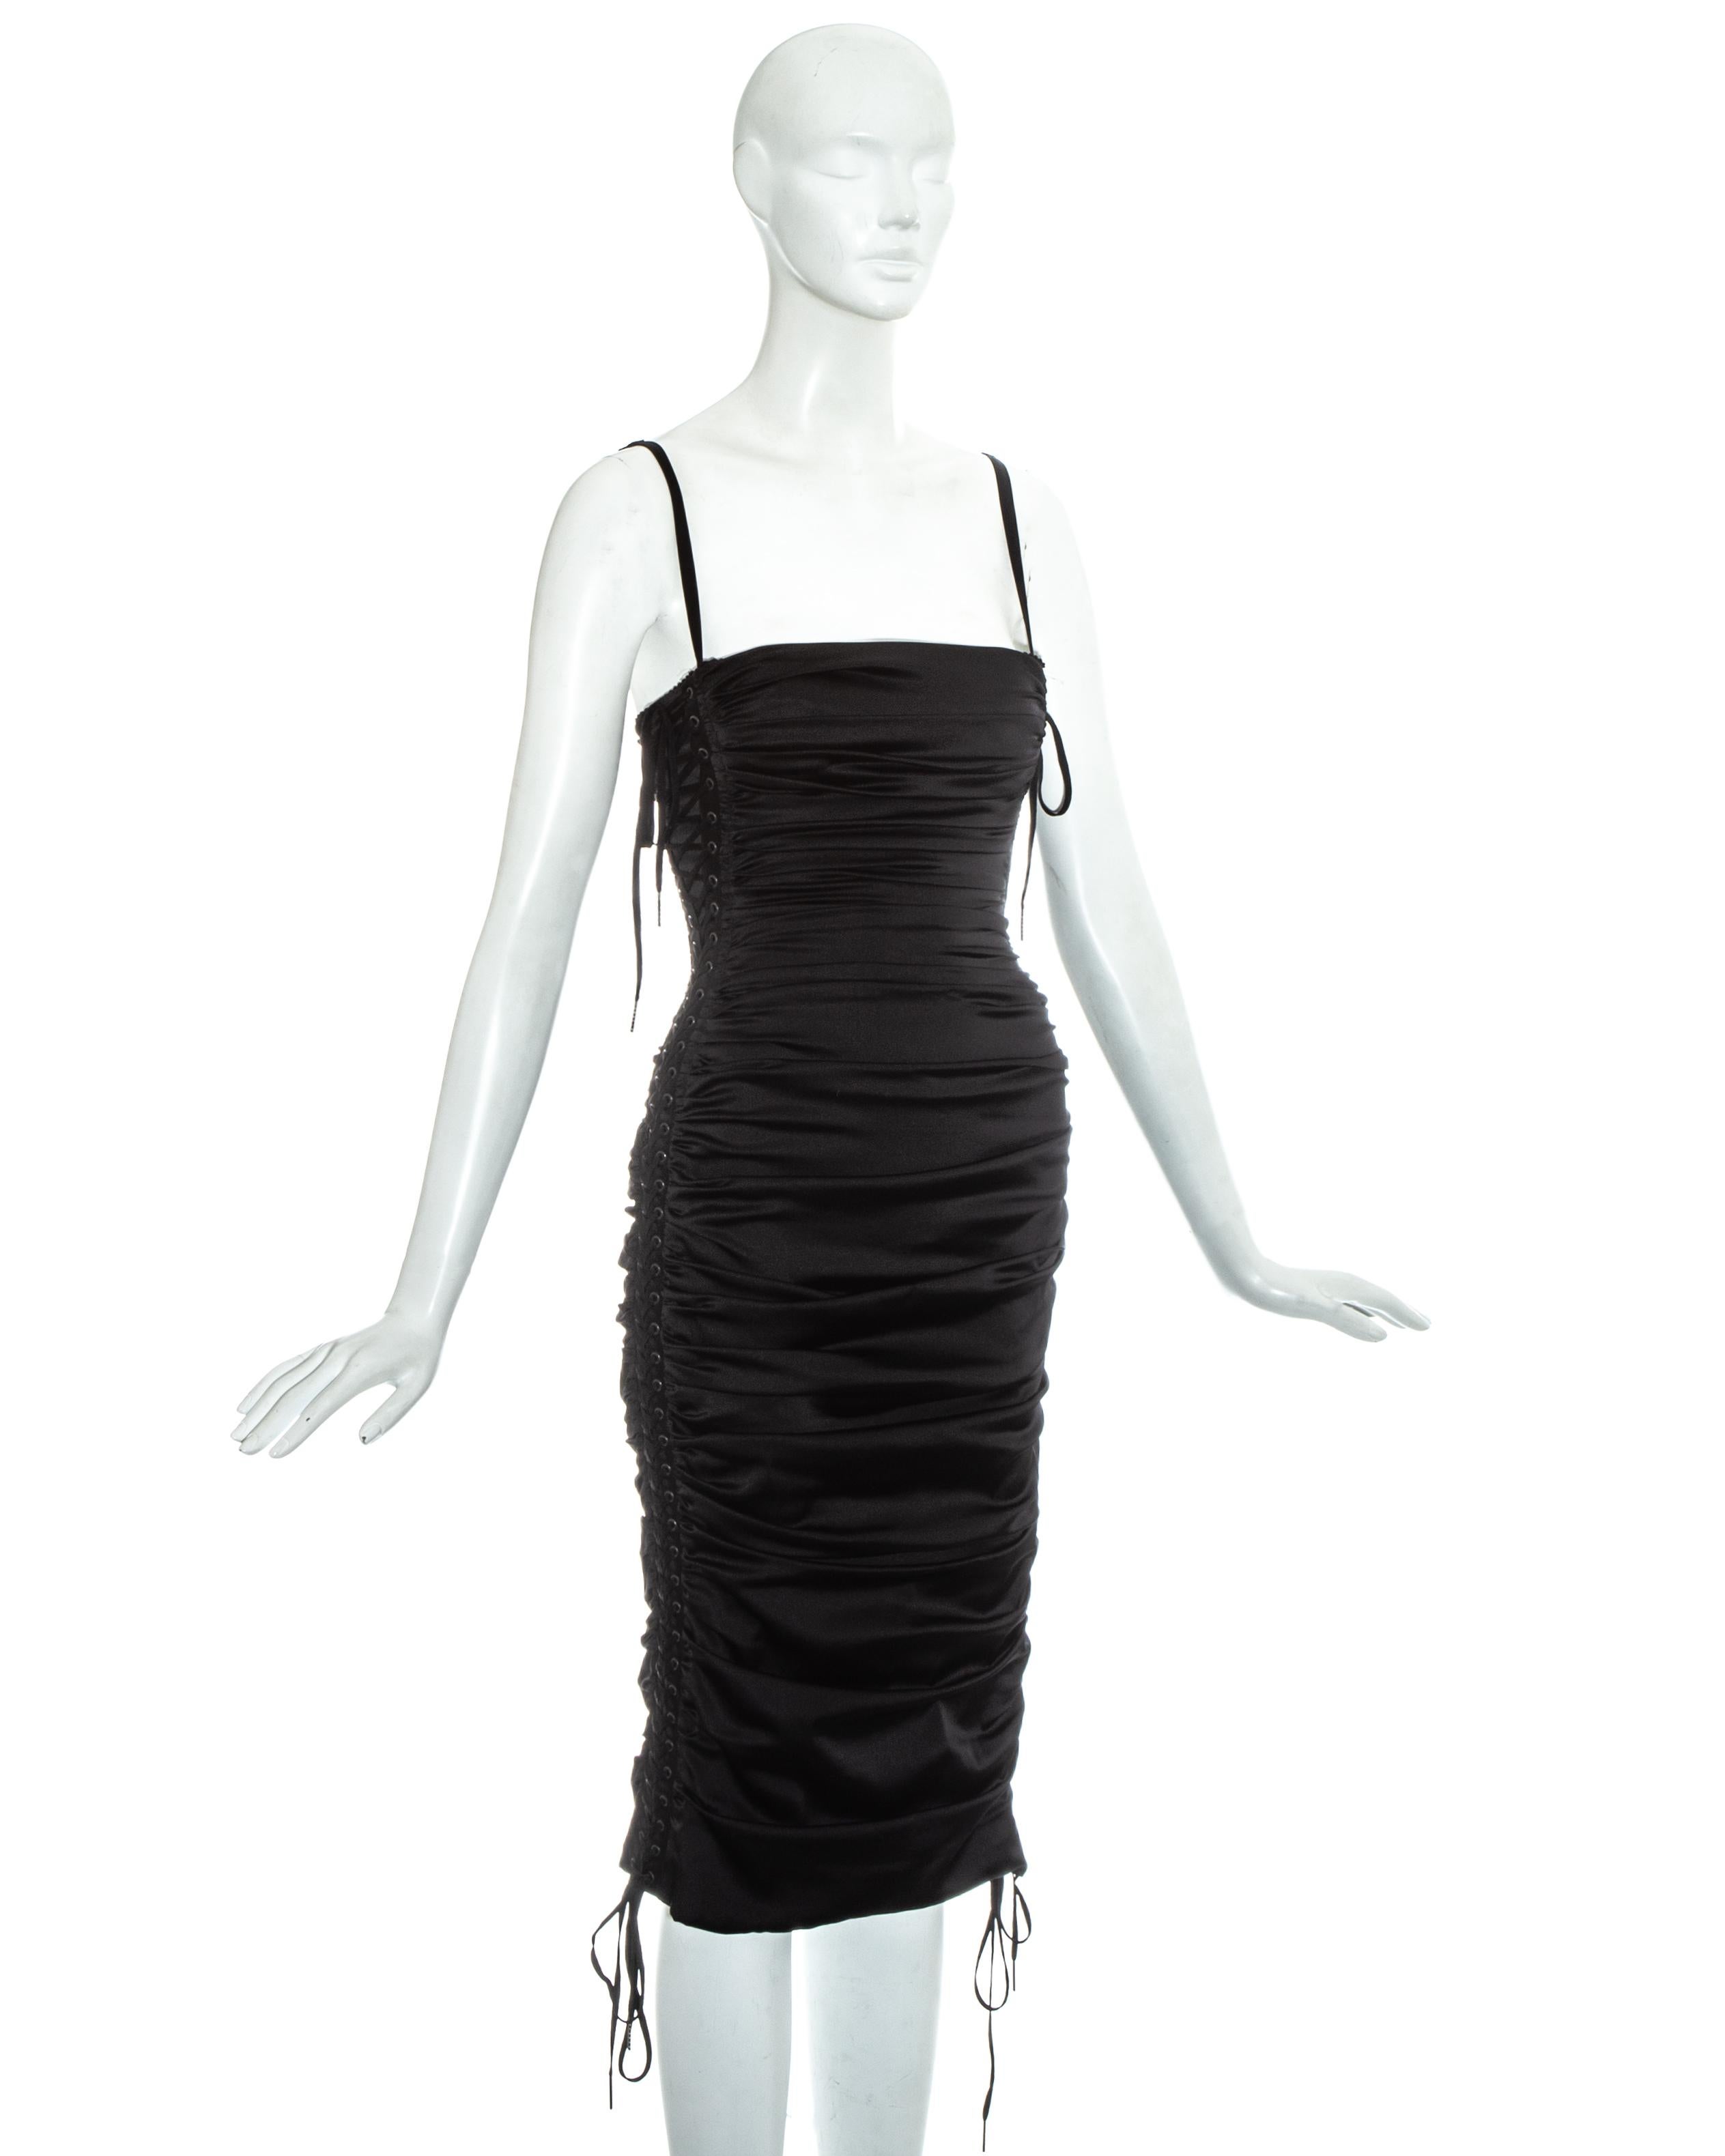 Dolce & Gabbana black ruched silk figure hugging mid-length evening dress with lace up fastenings on side panels and built in satin bra with adjustable shoulder straps

Spring-Summer 2003